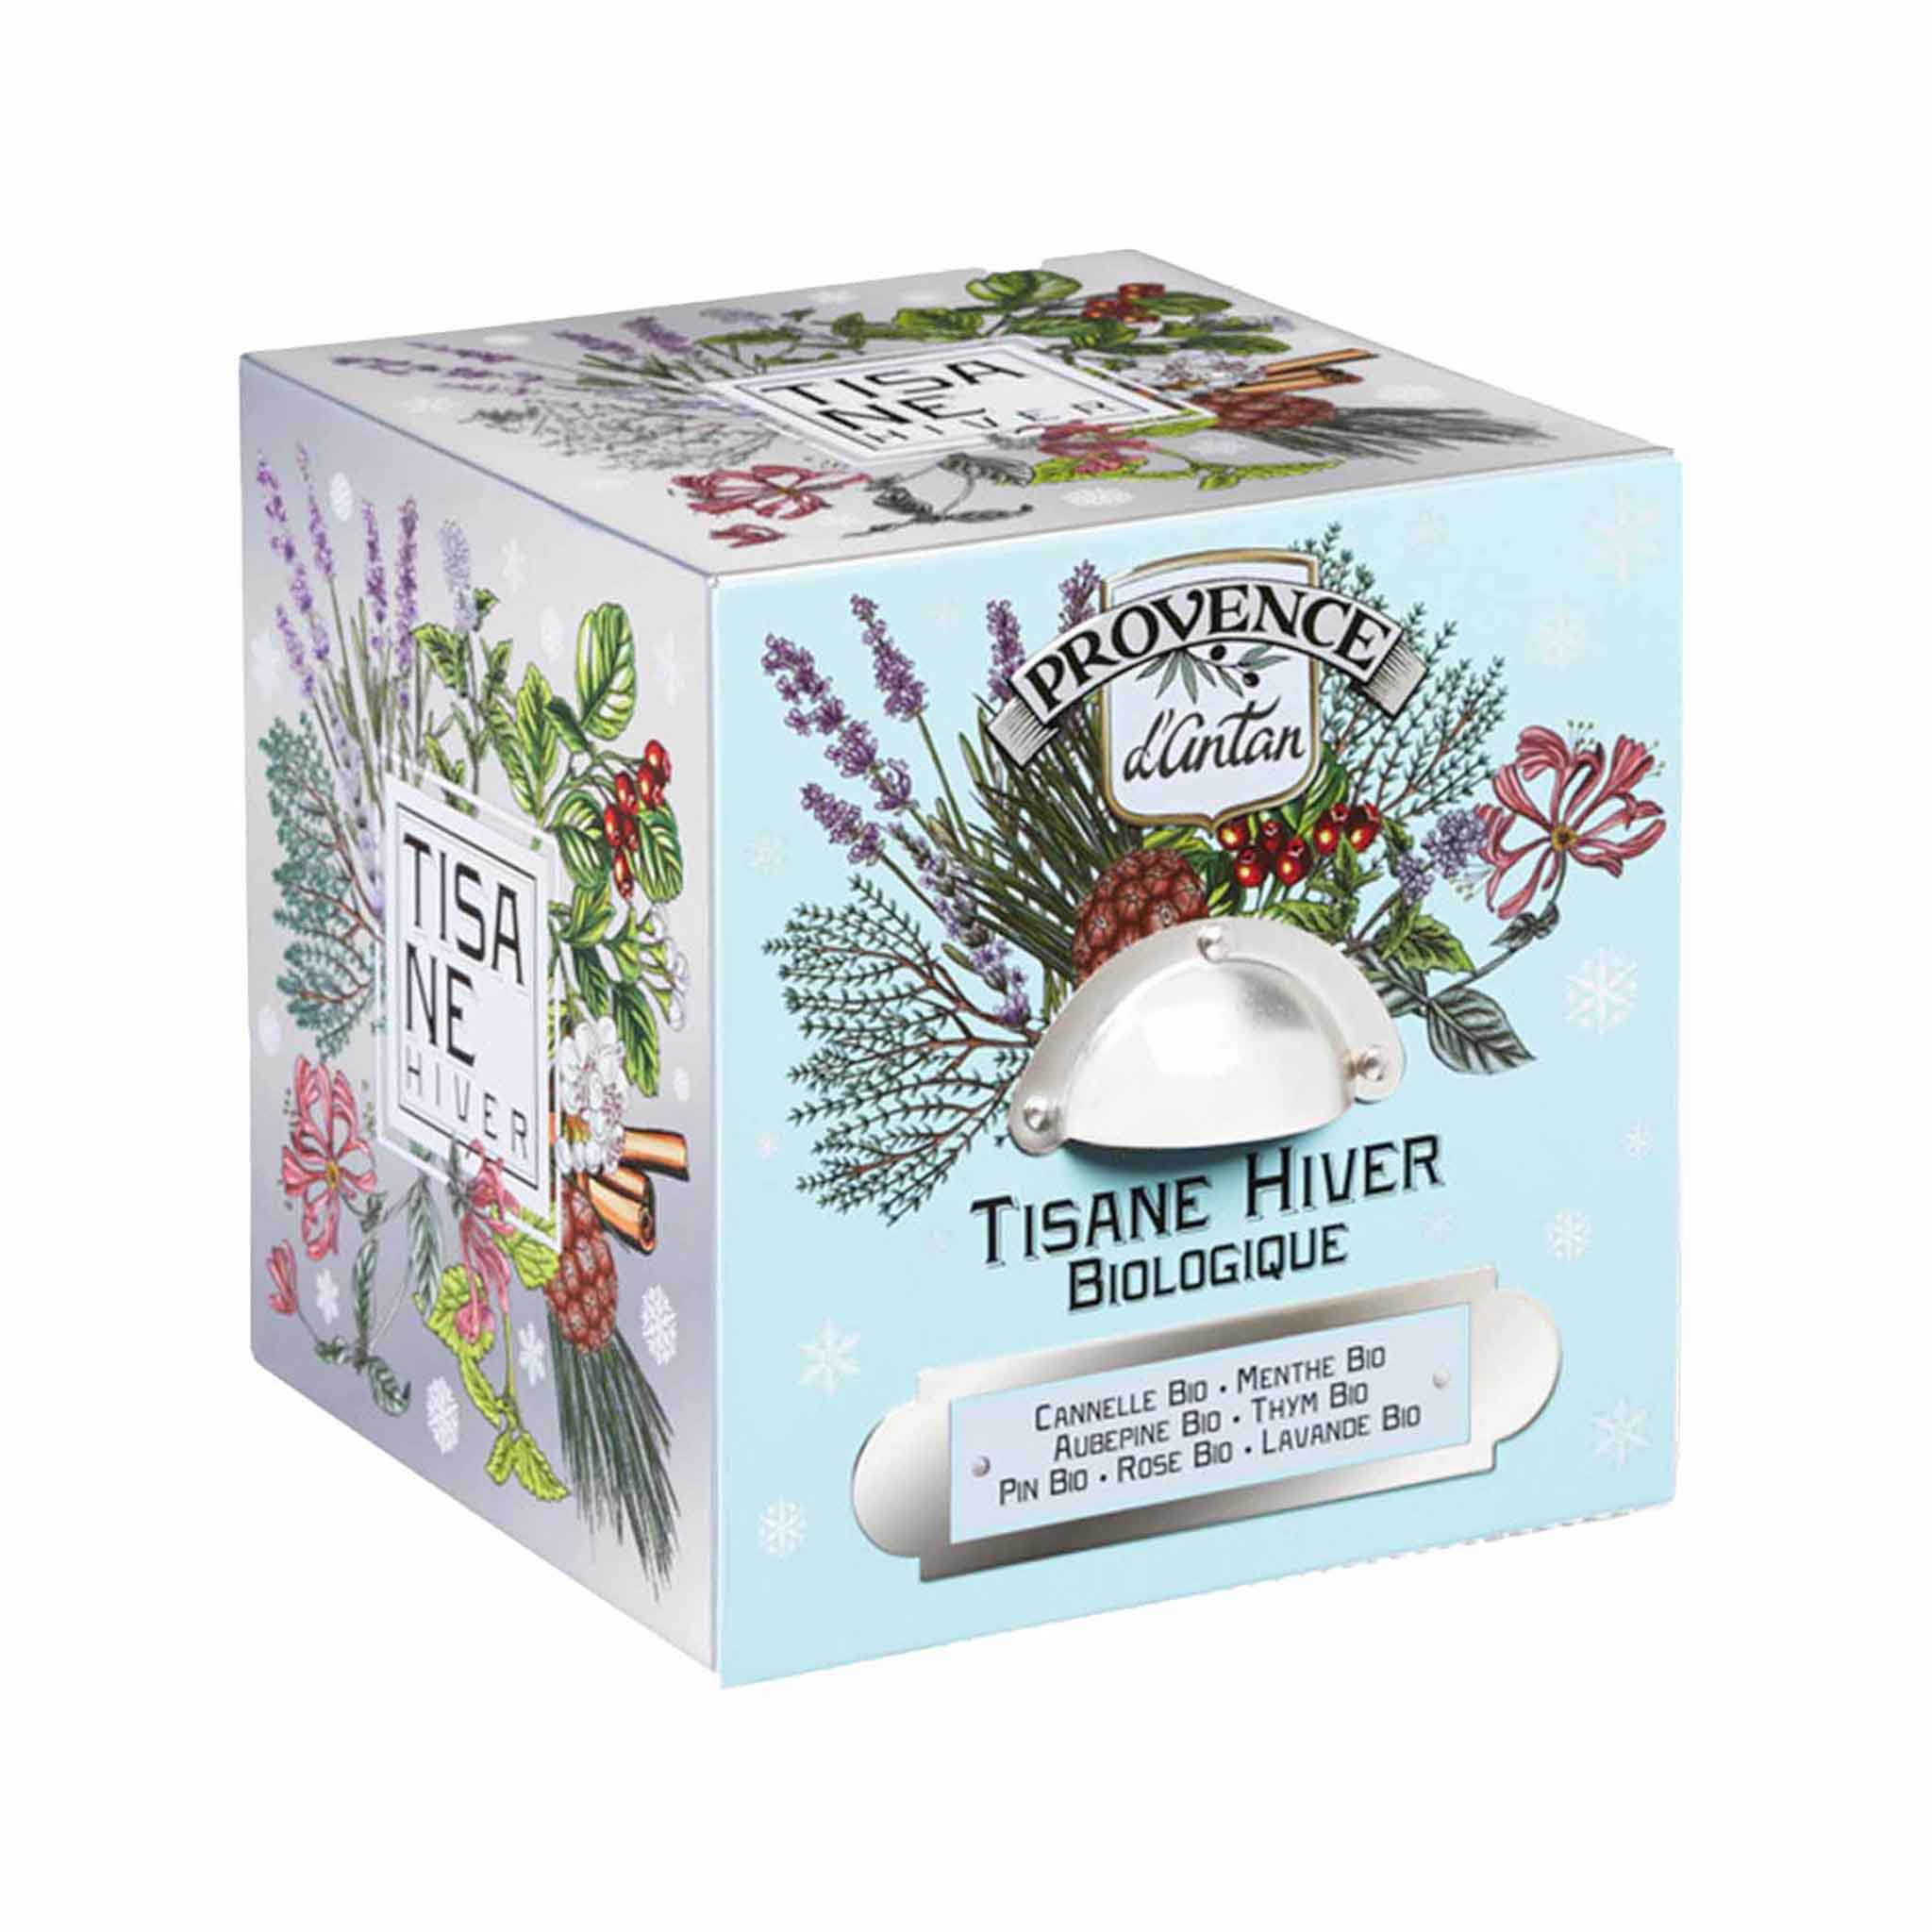 A blend of Cinnamon, Mint, Hawthorn, Thyme, Pine, Rose, and Lavender come together to create this aromatic and comforting herbal tea from France.